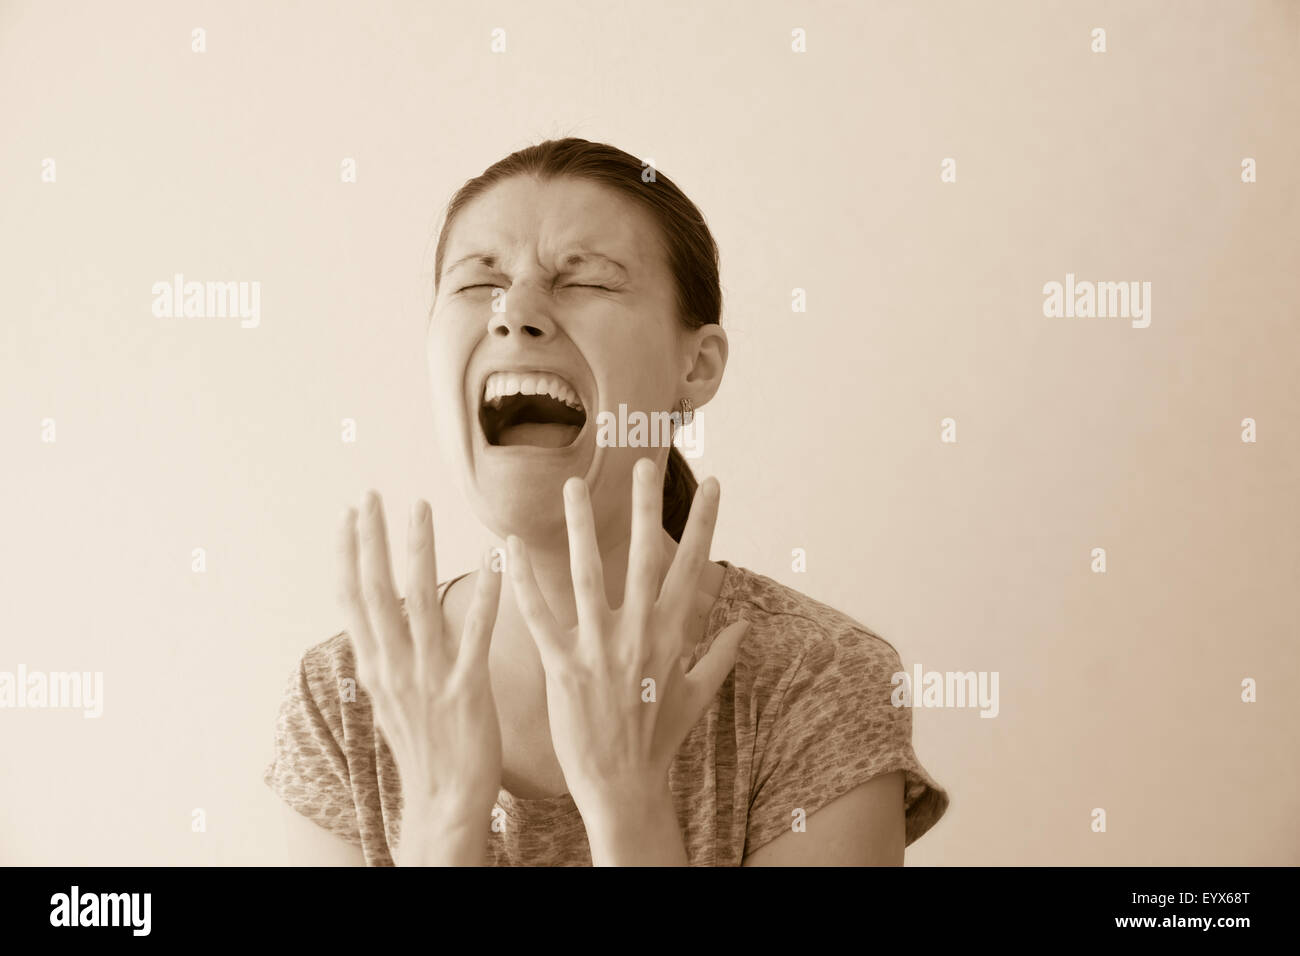 Crying depressed sad abuse young woman, dramatic portrait Stock Photo